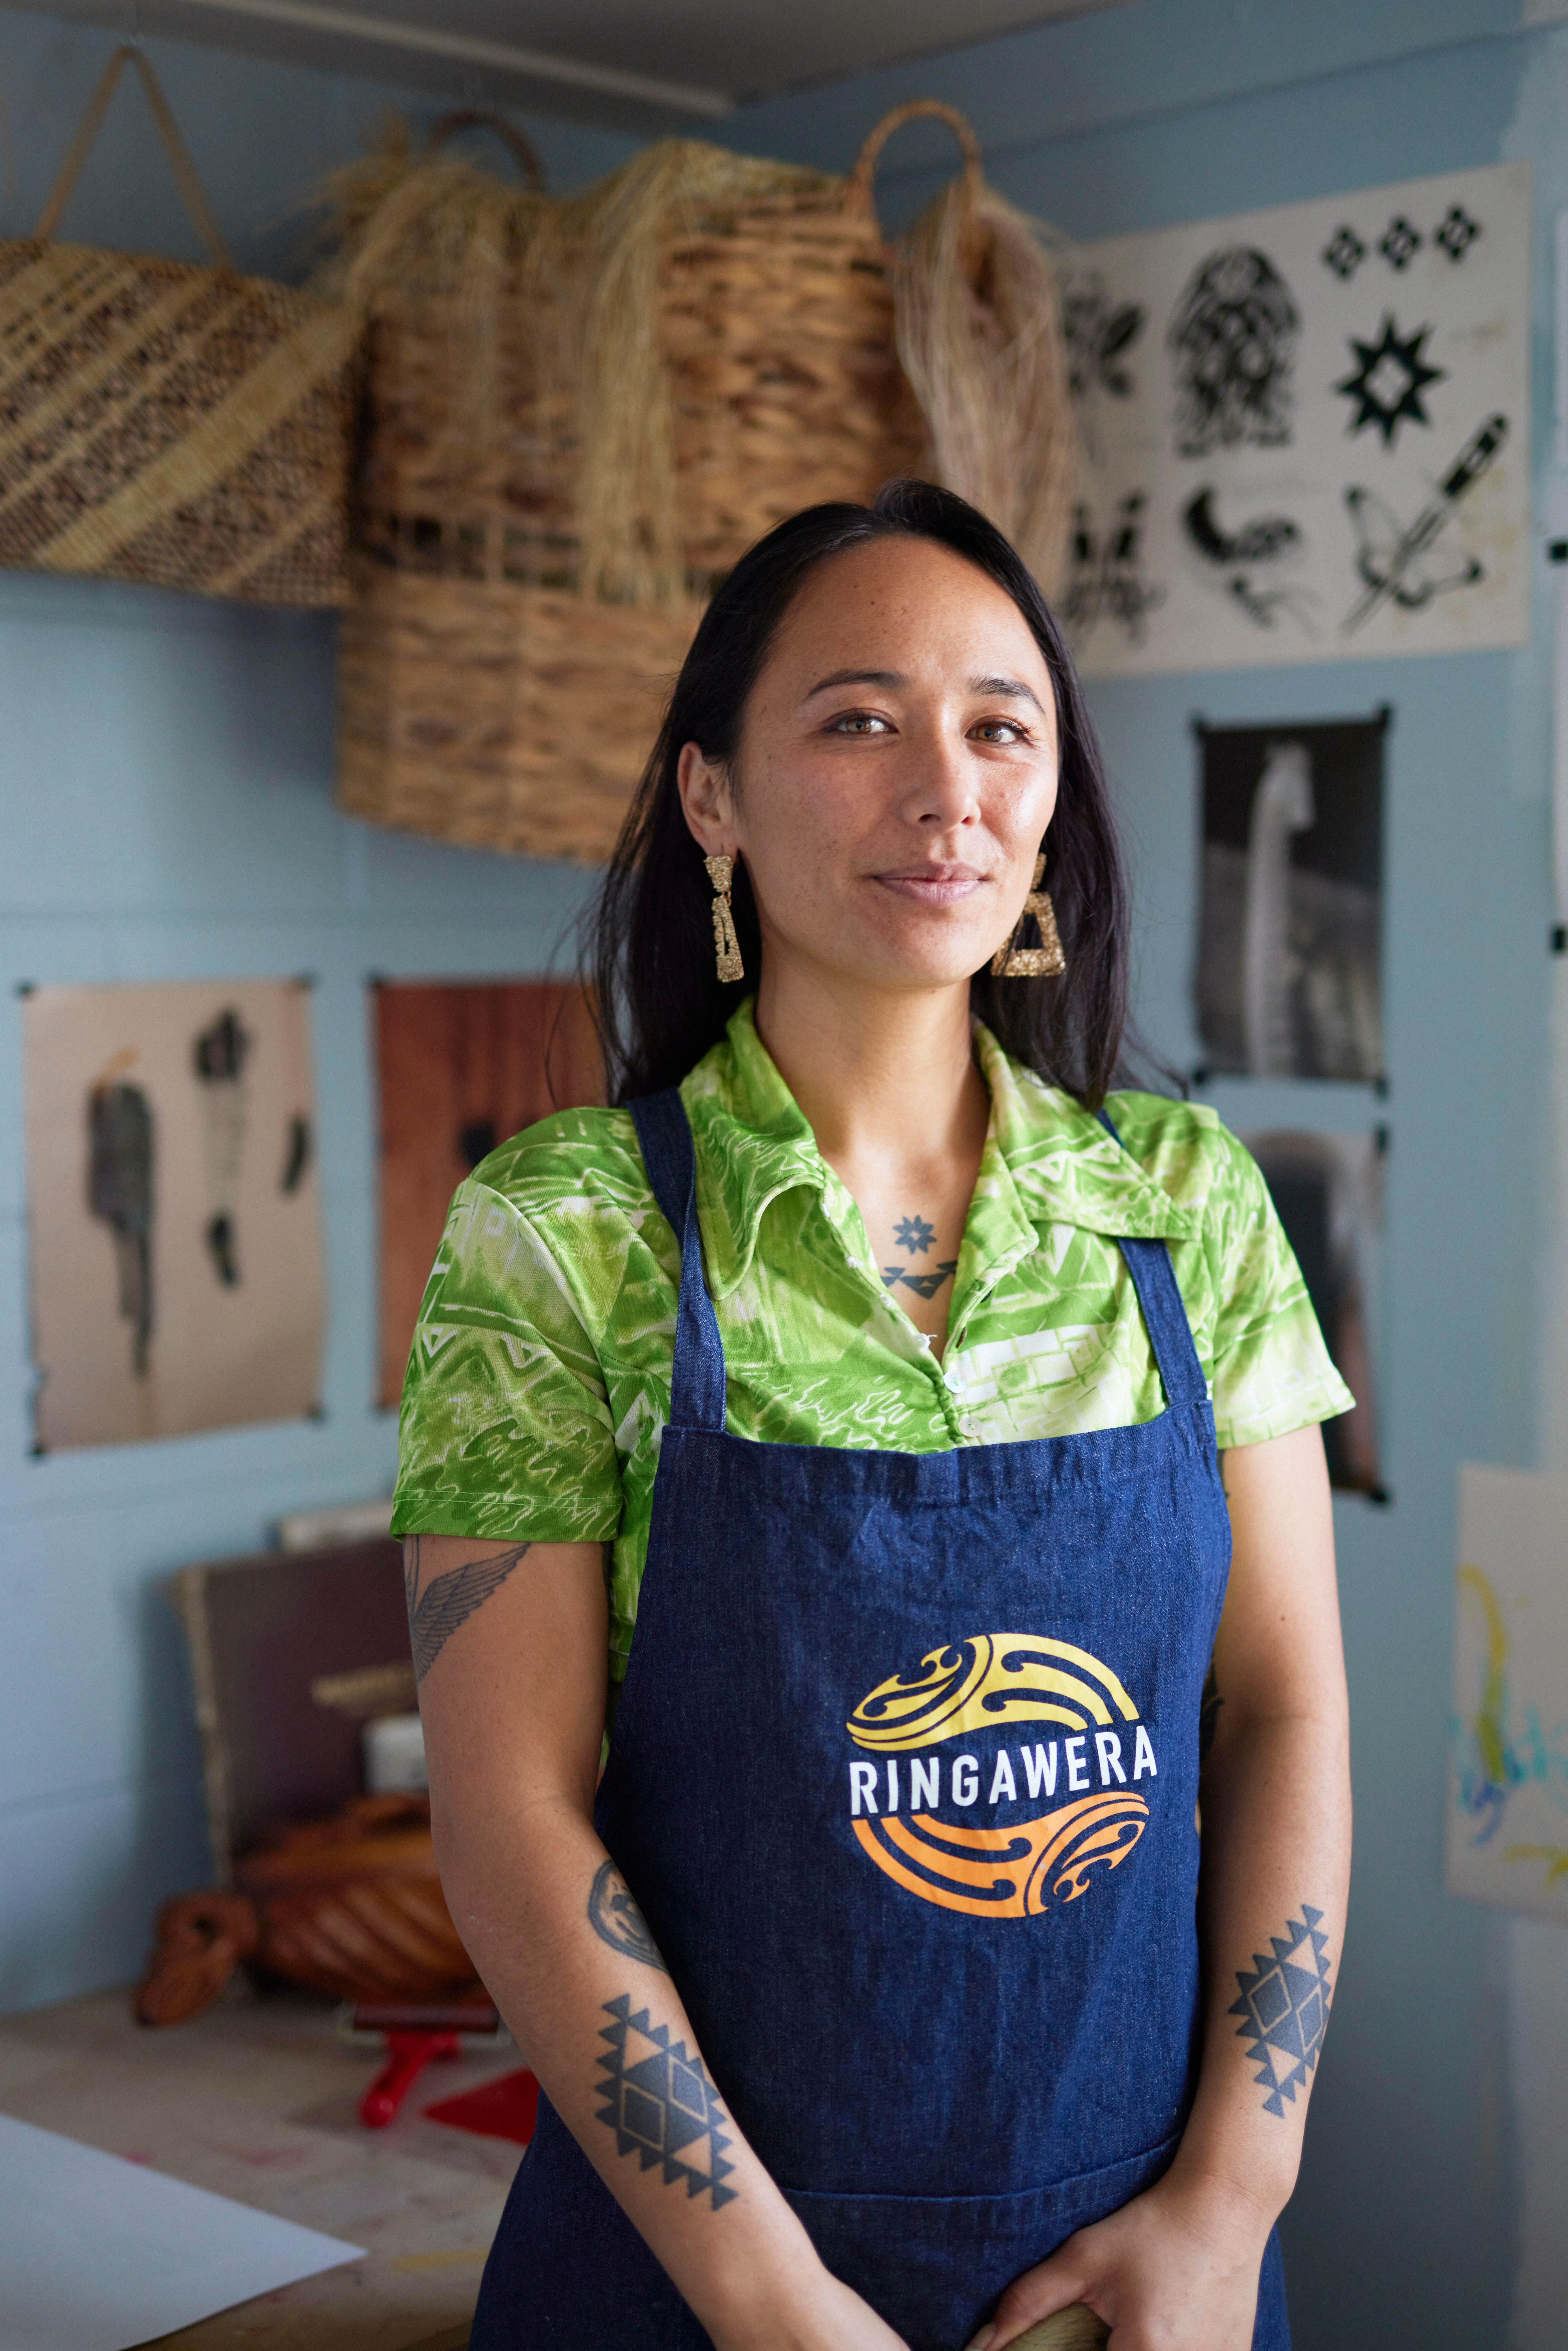 Emiko Sheehan stands in front of a wall covered with art. She wears a bright green shirt, long earrings, has tattoos on her arms, and an apron that says 'ringawera'